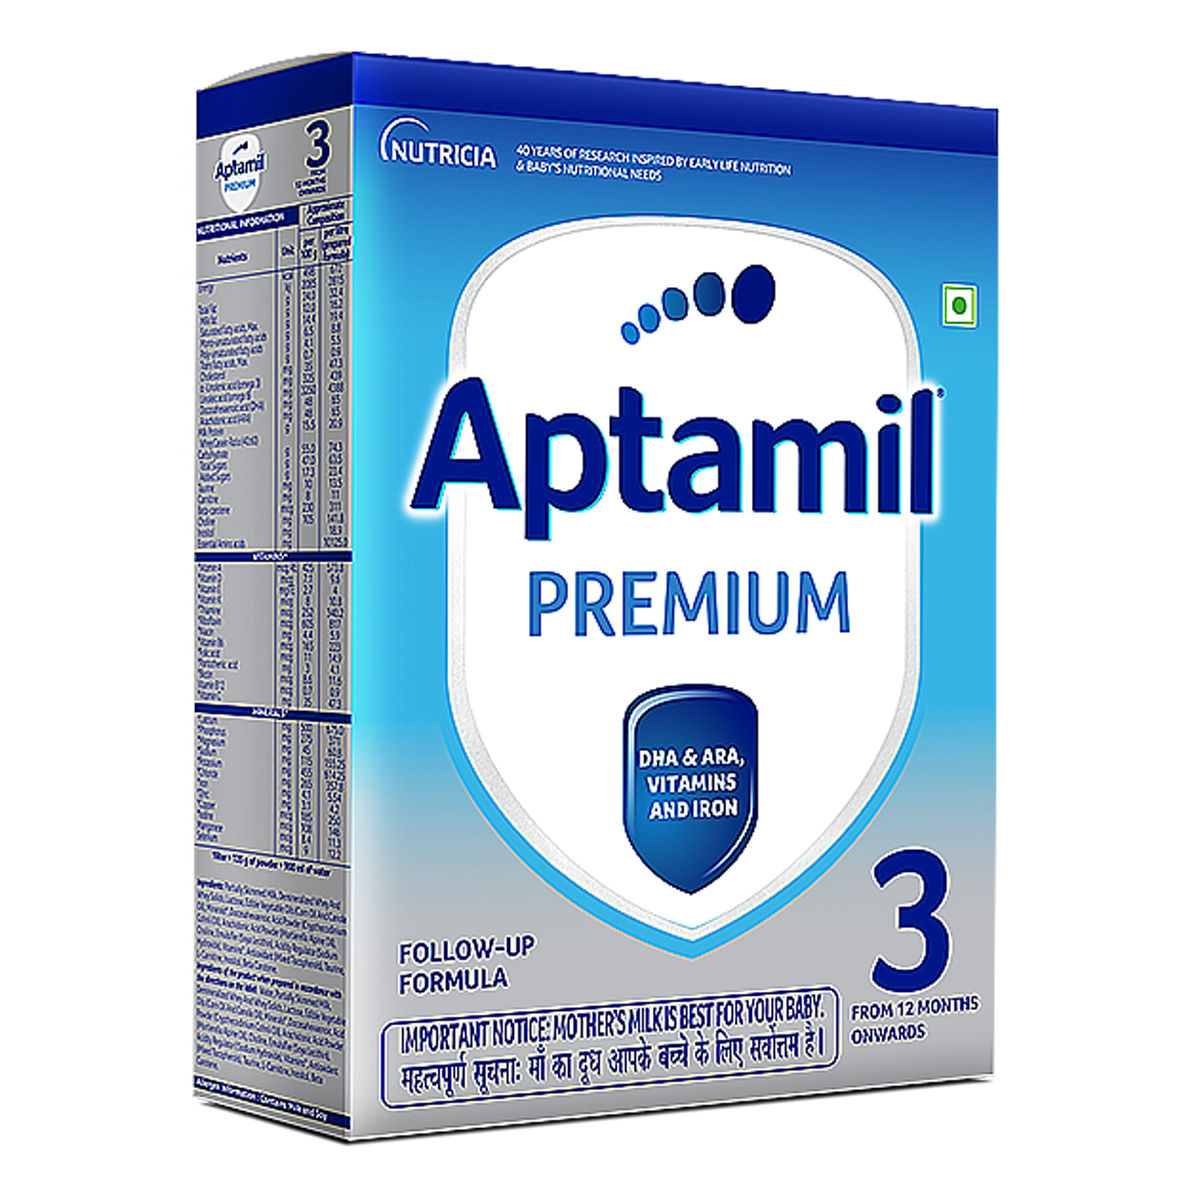 Aptamil Premium Follow-Up Formula Stage 3 Powder, 400 gm Refill Pack Price,  Uses, Side Effects, Composition - Apollo Pharmacy